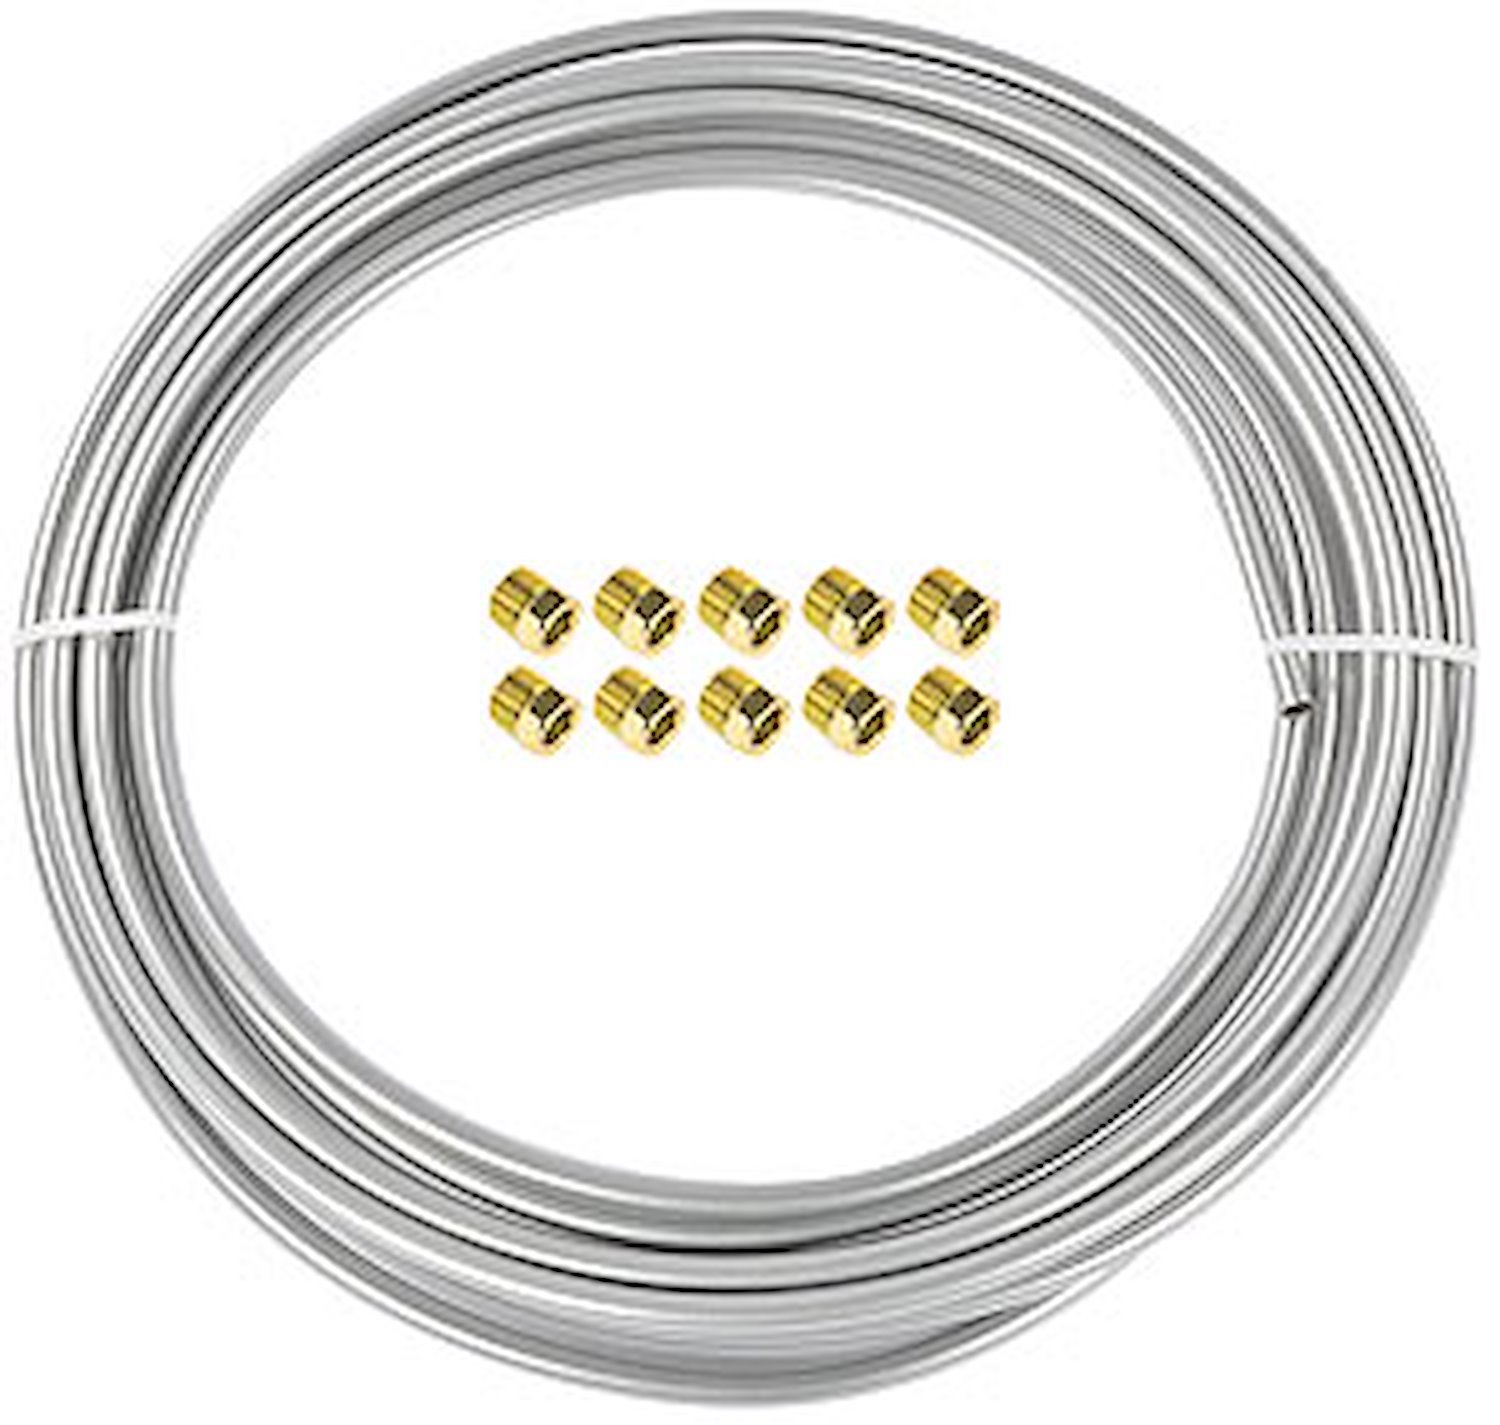 Silver Fuel and Transmission Cooler Tubing Kit 3/8 in. Diameter x 25 ft.